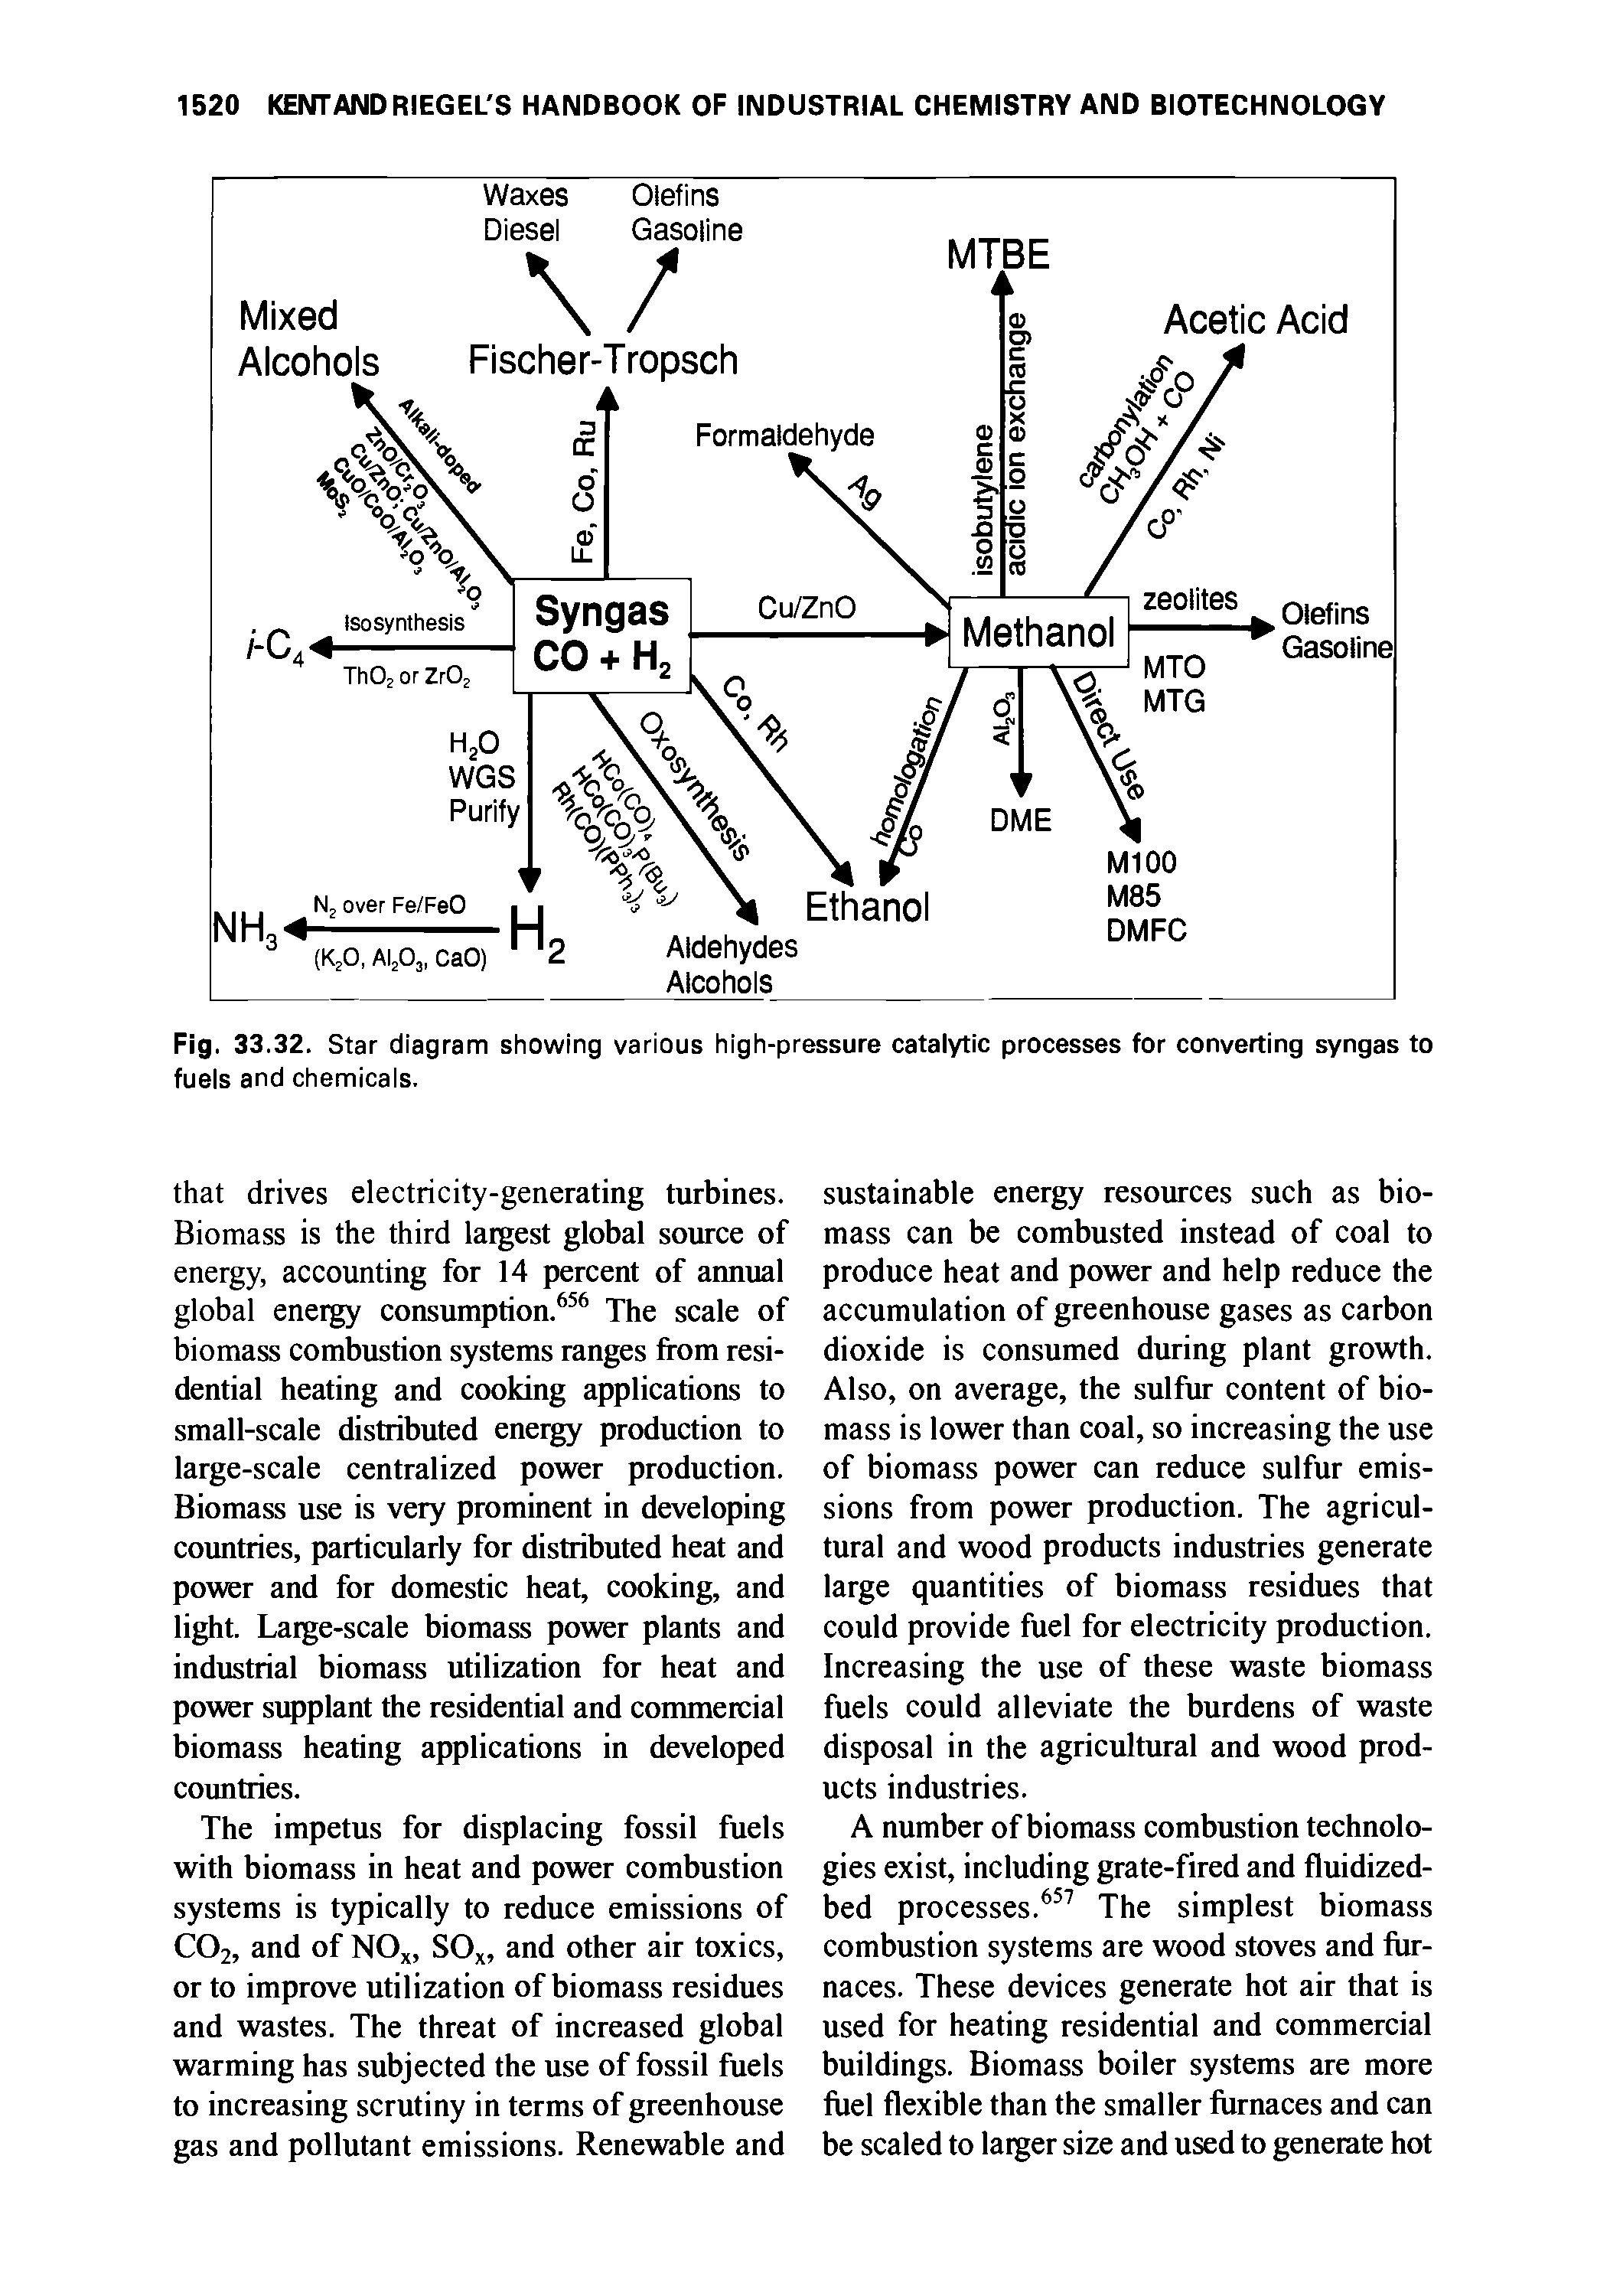 Fig. 33.32. Star diagram showing various high-pressure catalytic processes for converting syngas to fuels and chemicals.